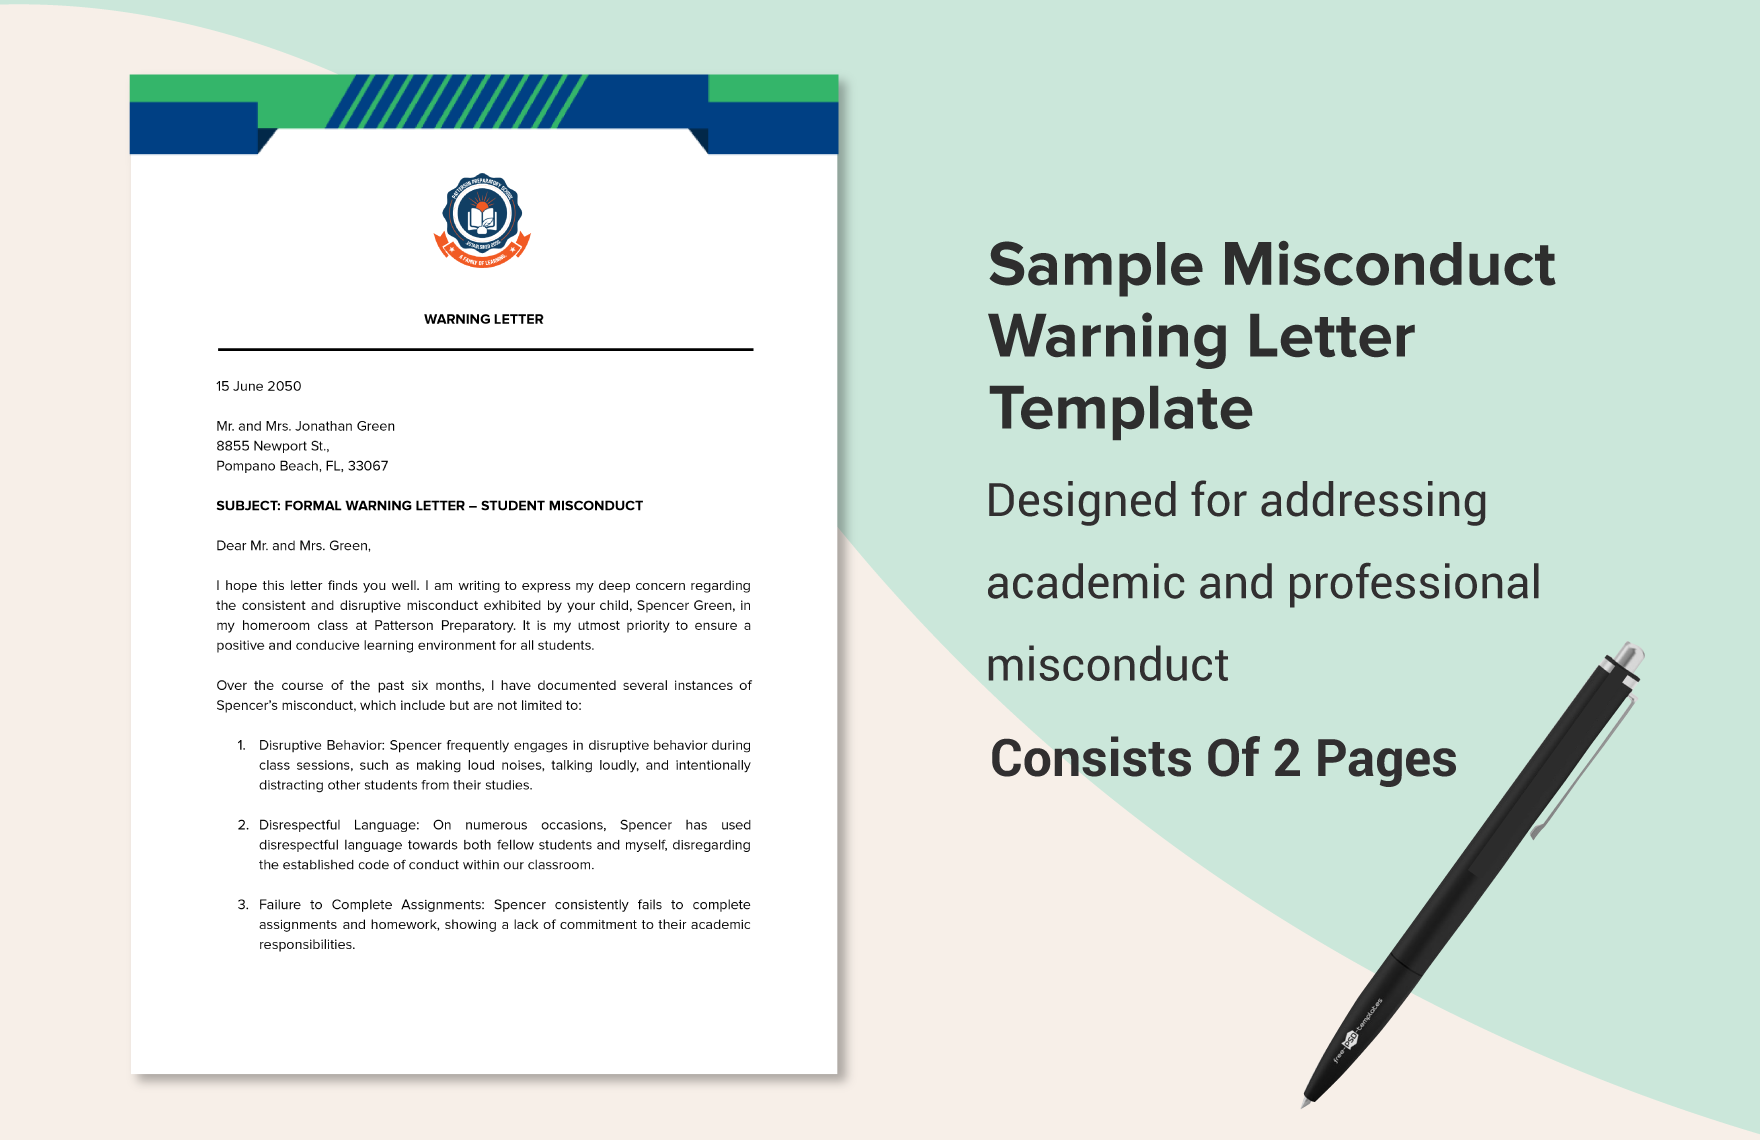 Sample Misconduct Warning Letter Template